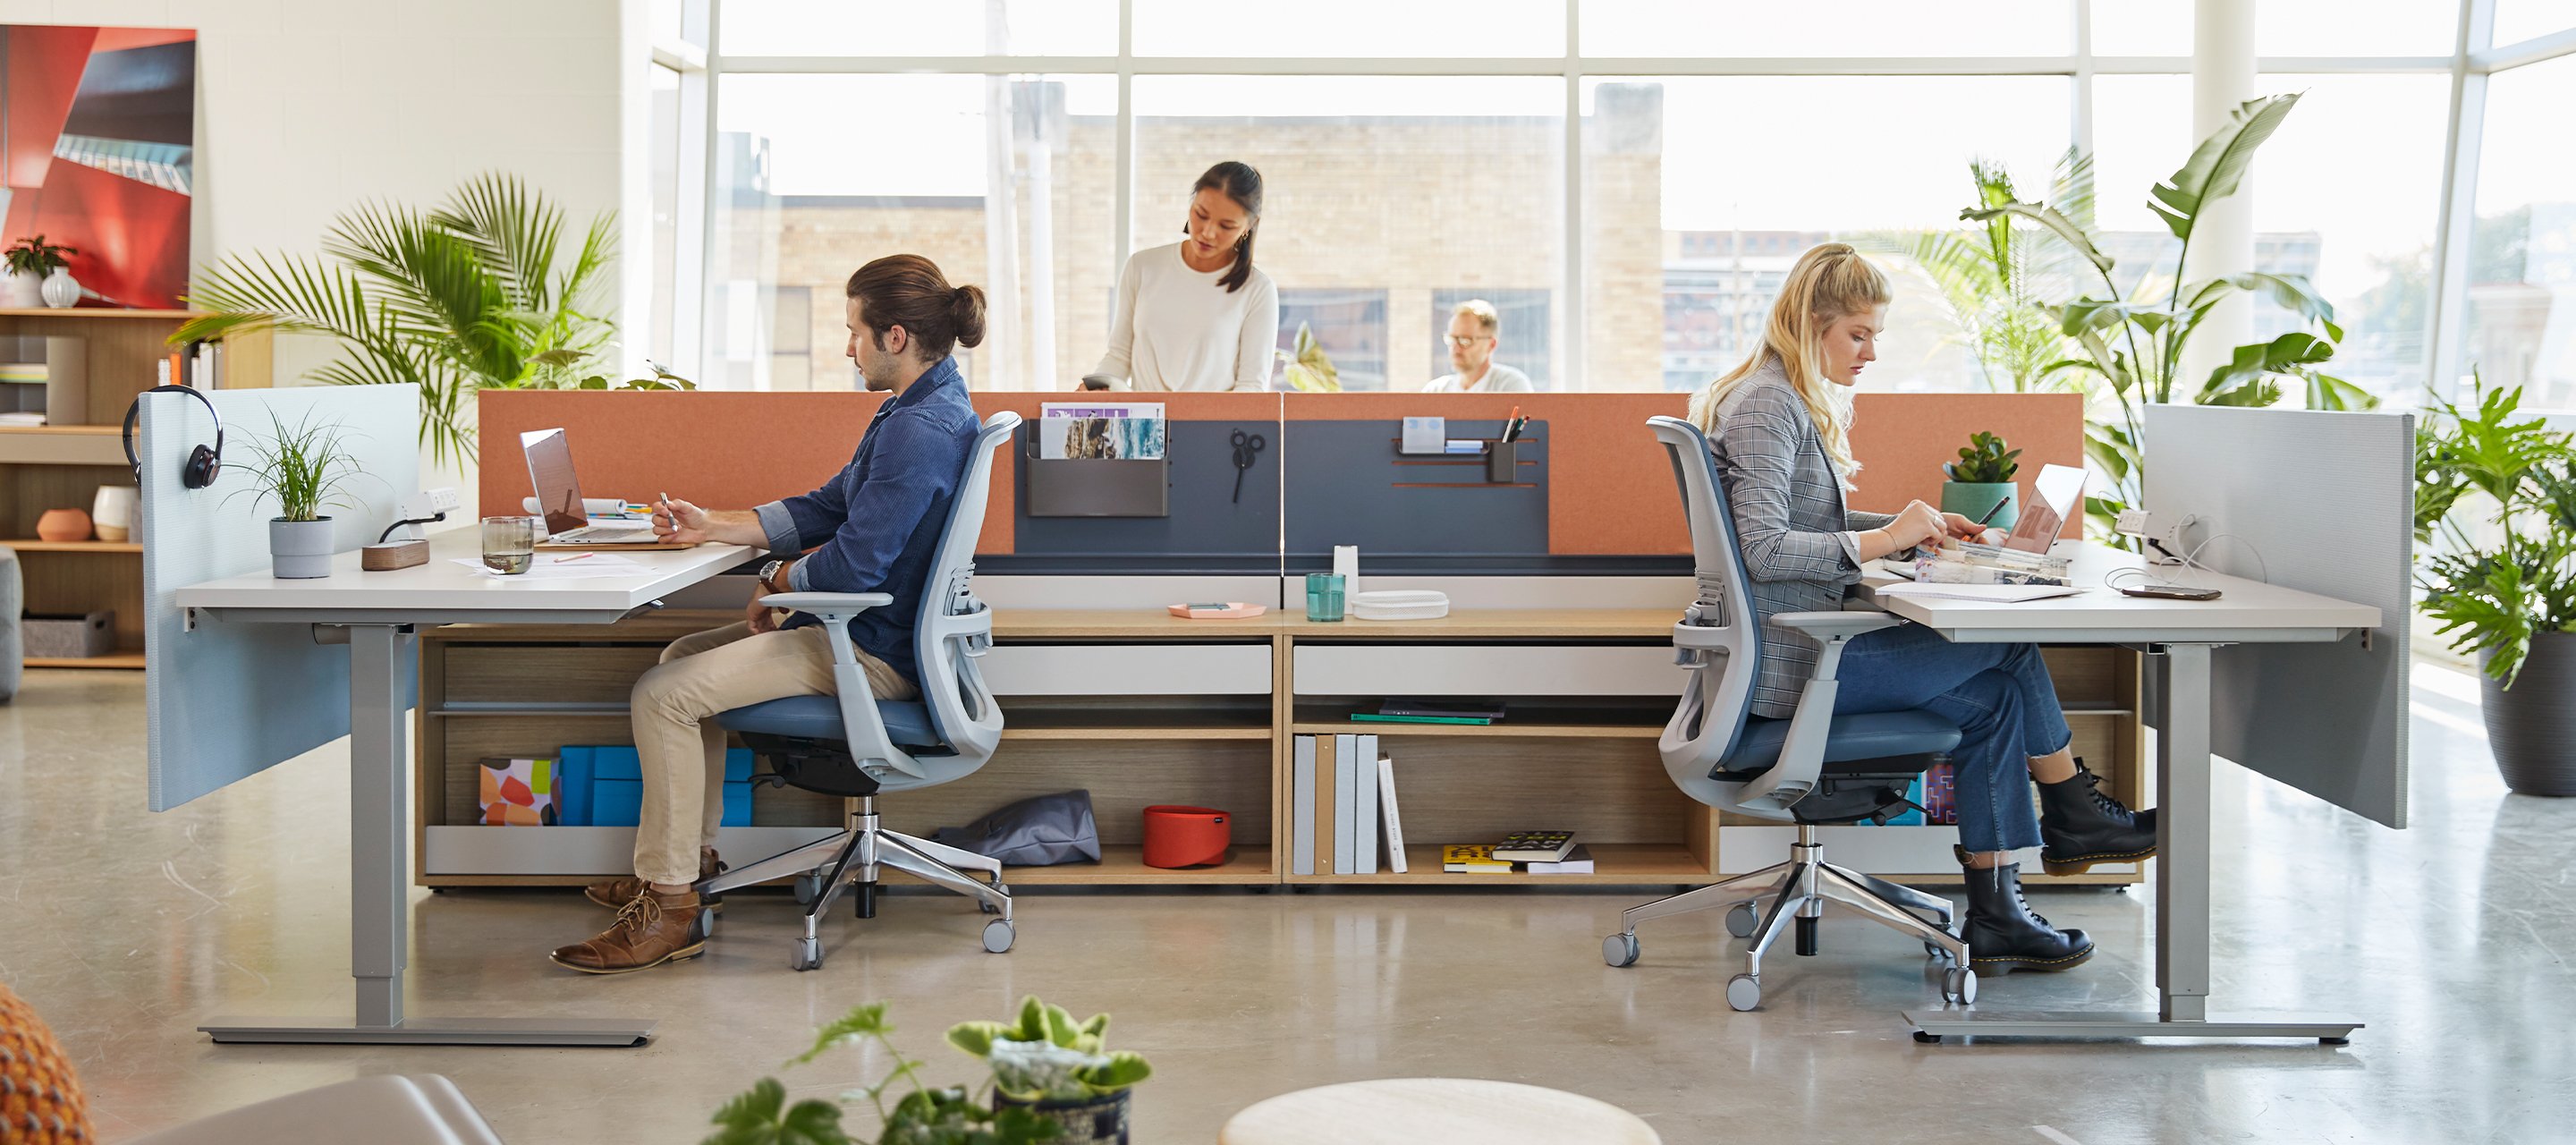 Haworth Zody chairs and Height adjustable table at 2 workstations in an office